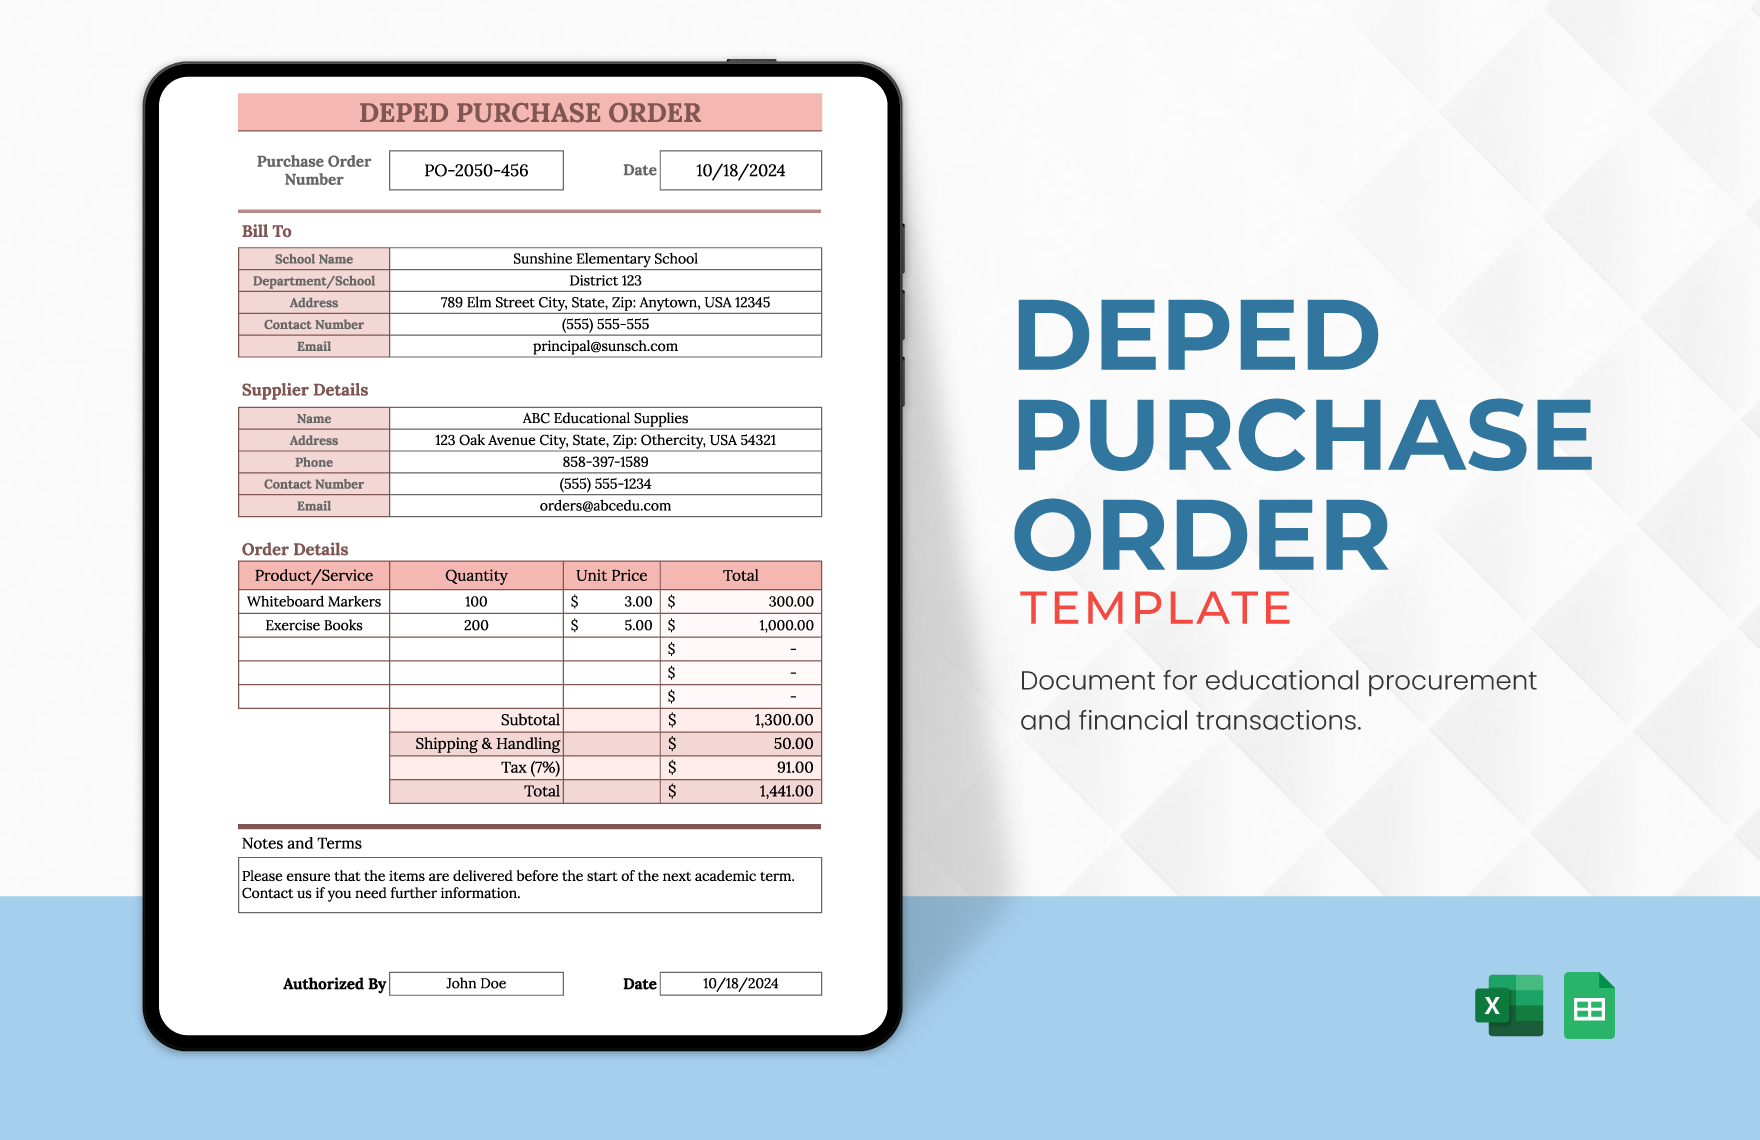 Free Deped Purchase Order Template in Excel, Google Sheets